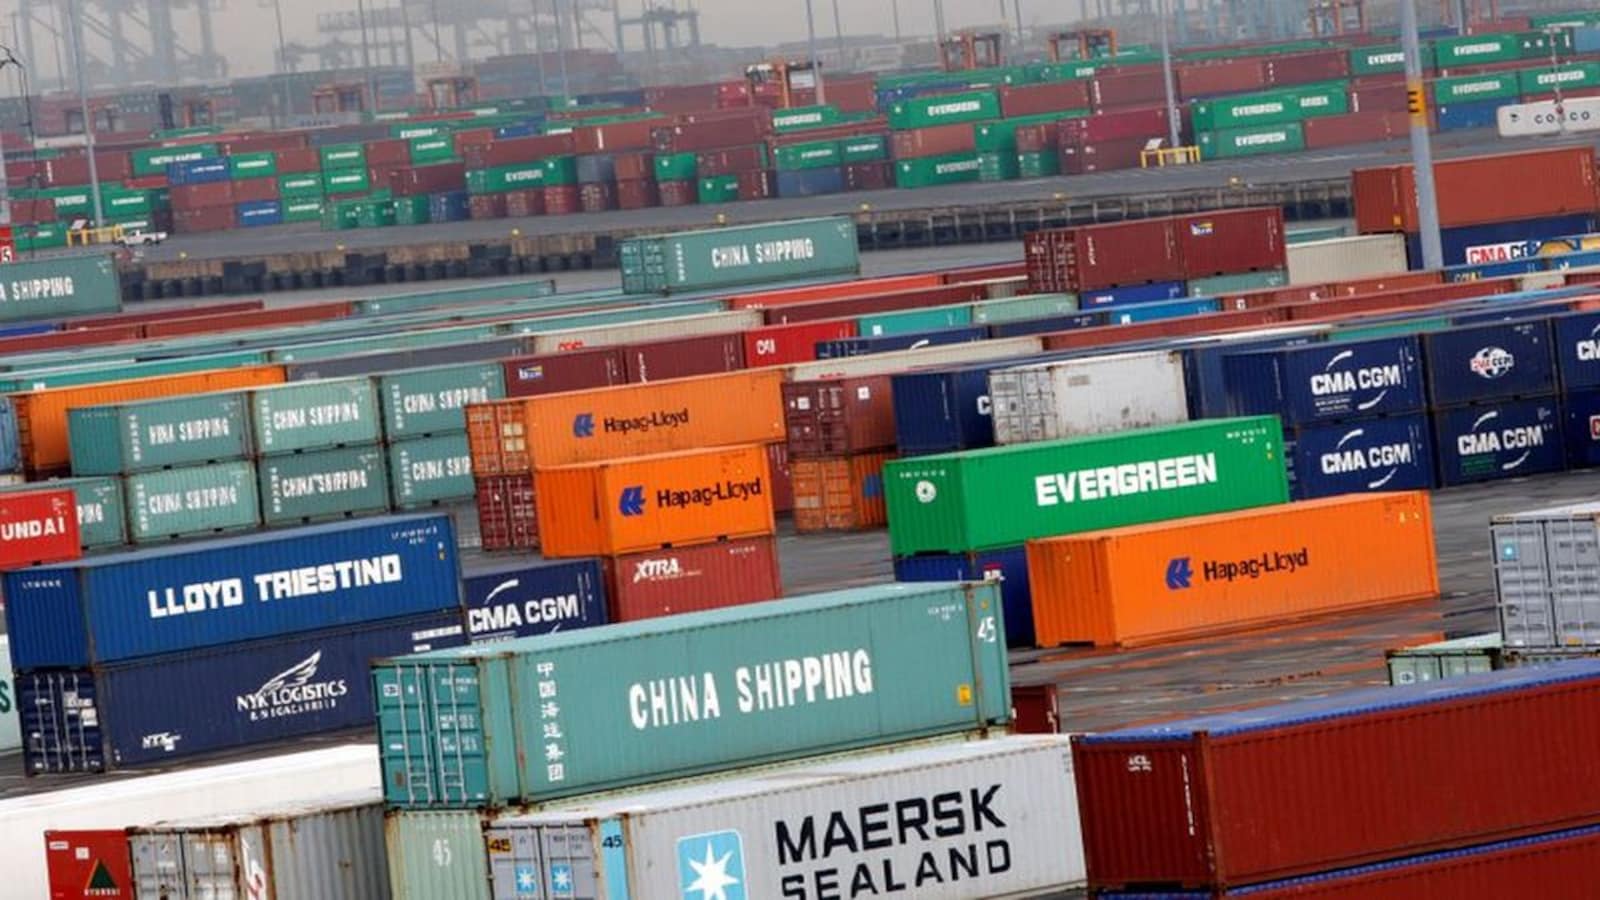 india's exports rise to record high of $418 billion in fy22